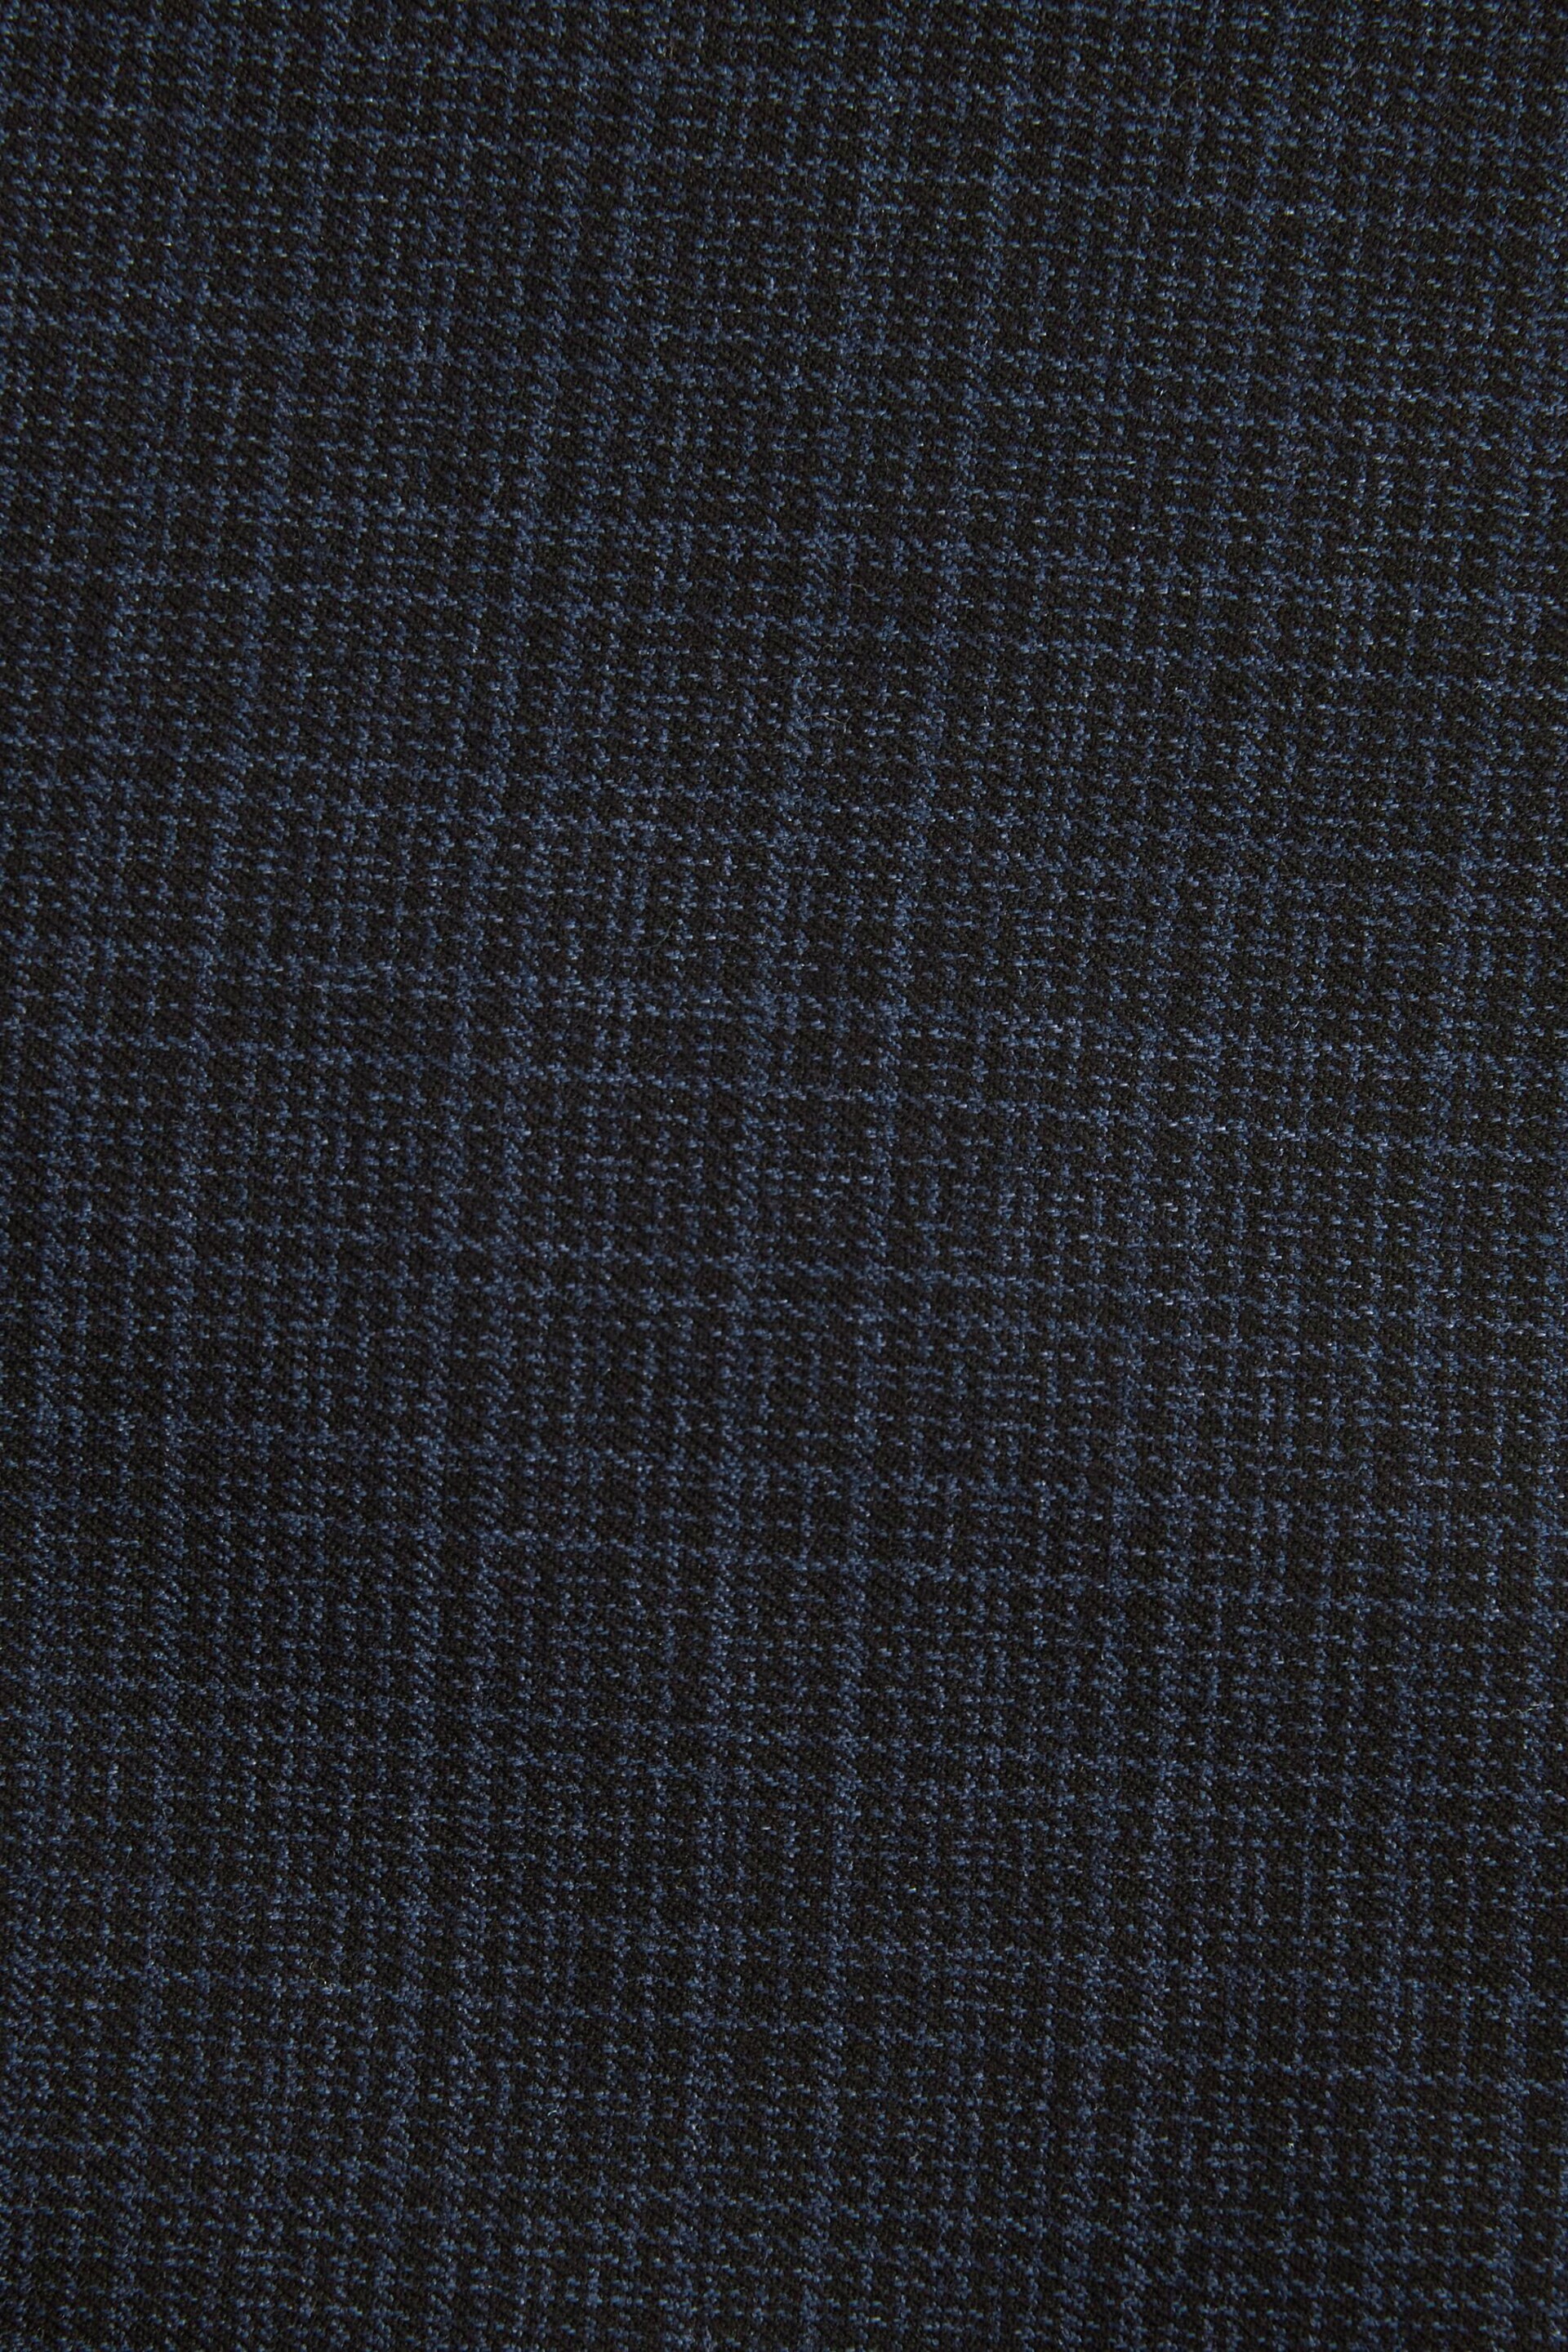 Navy Blue Skinny Check Suit Jacket - Image 10 of 13